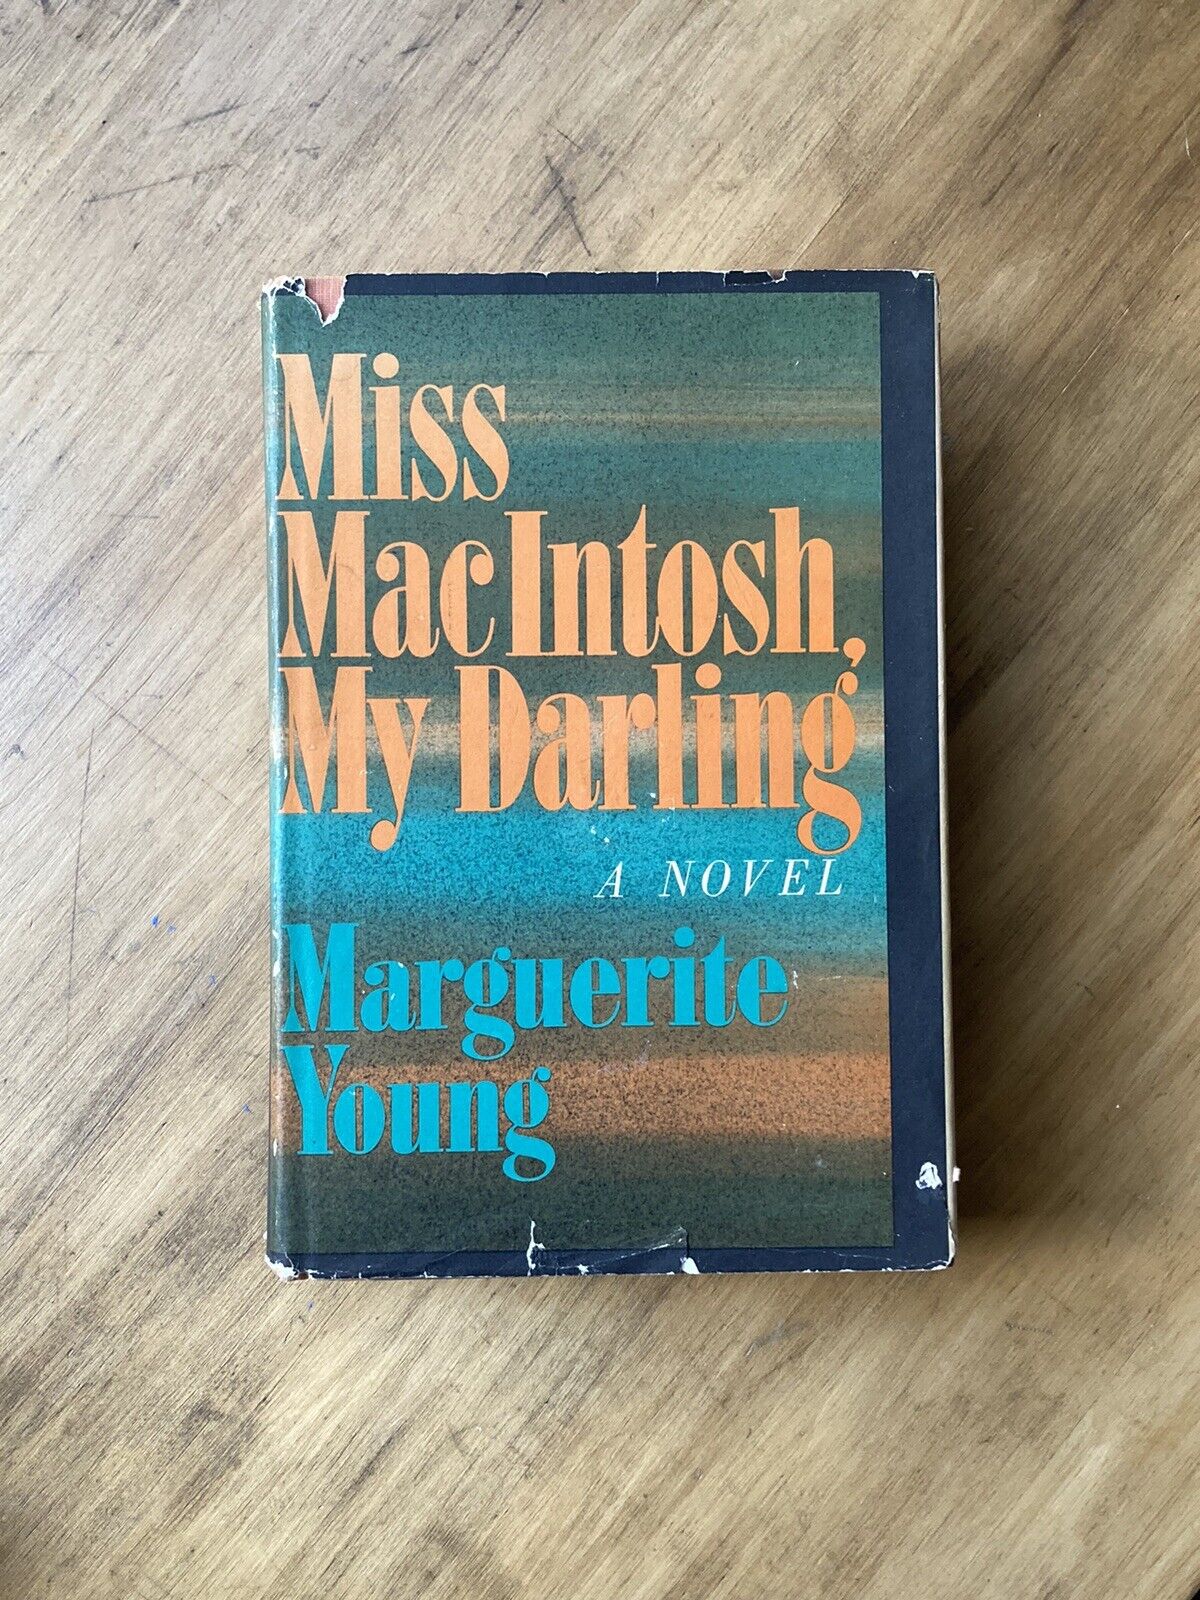 Marguerite Young MISS MACINTOSH, MY DARLING 1965 1st edition hardcover DJ good